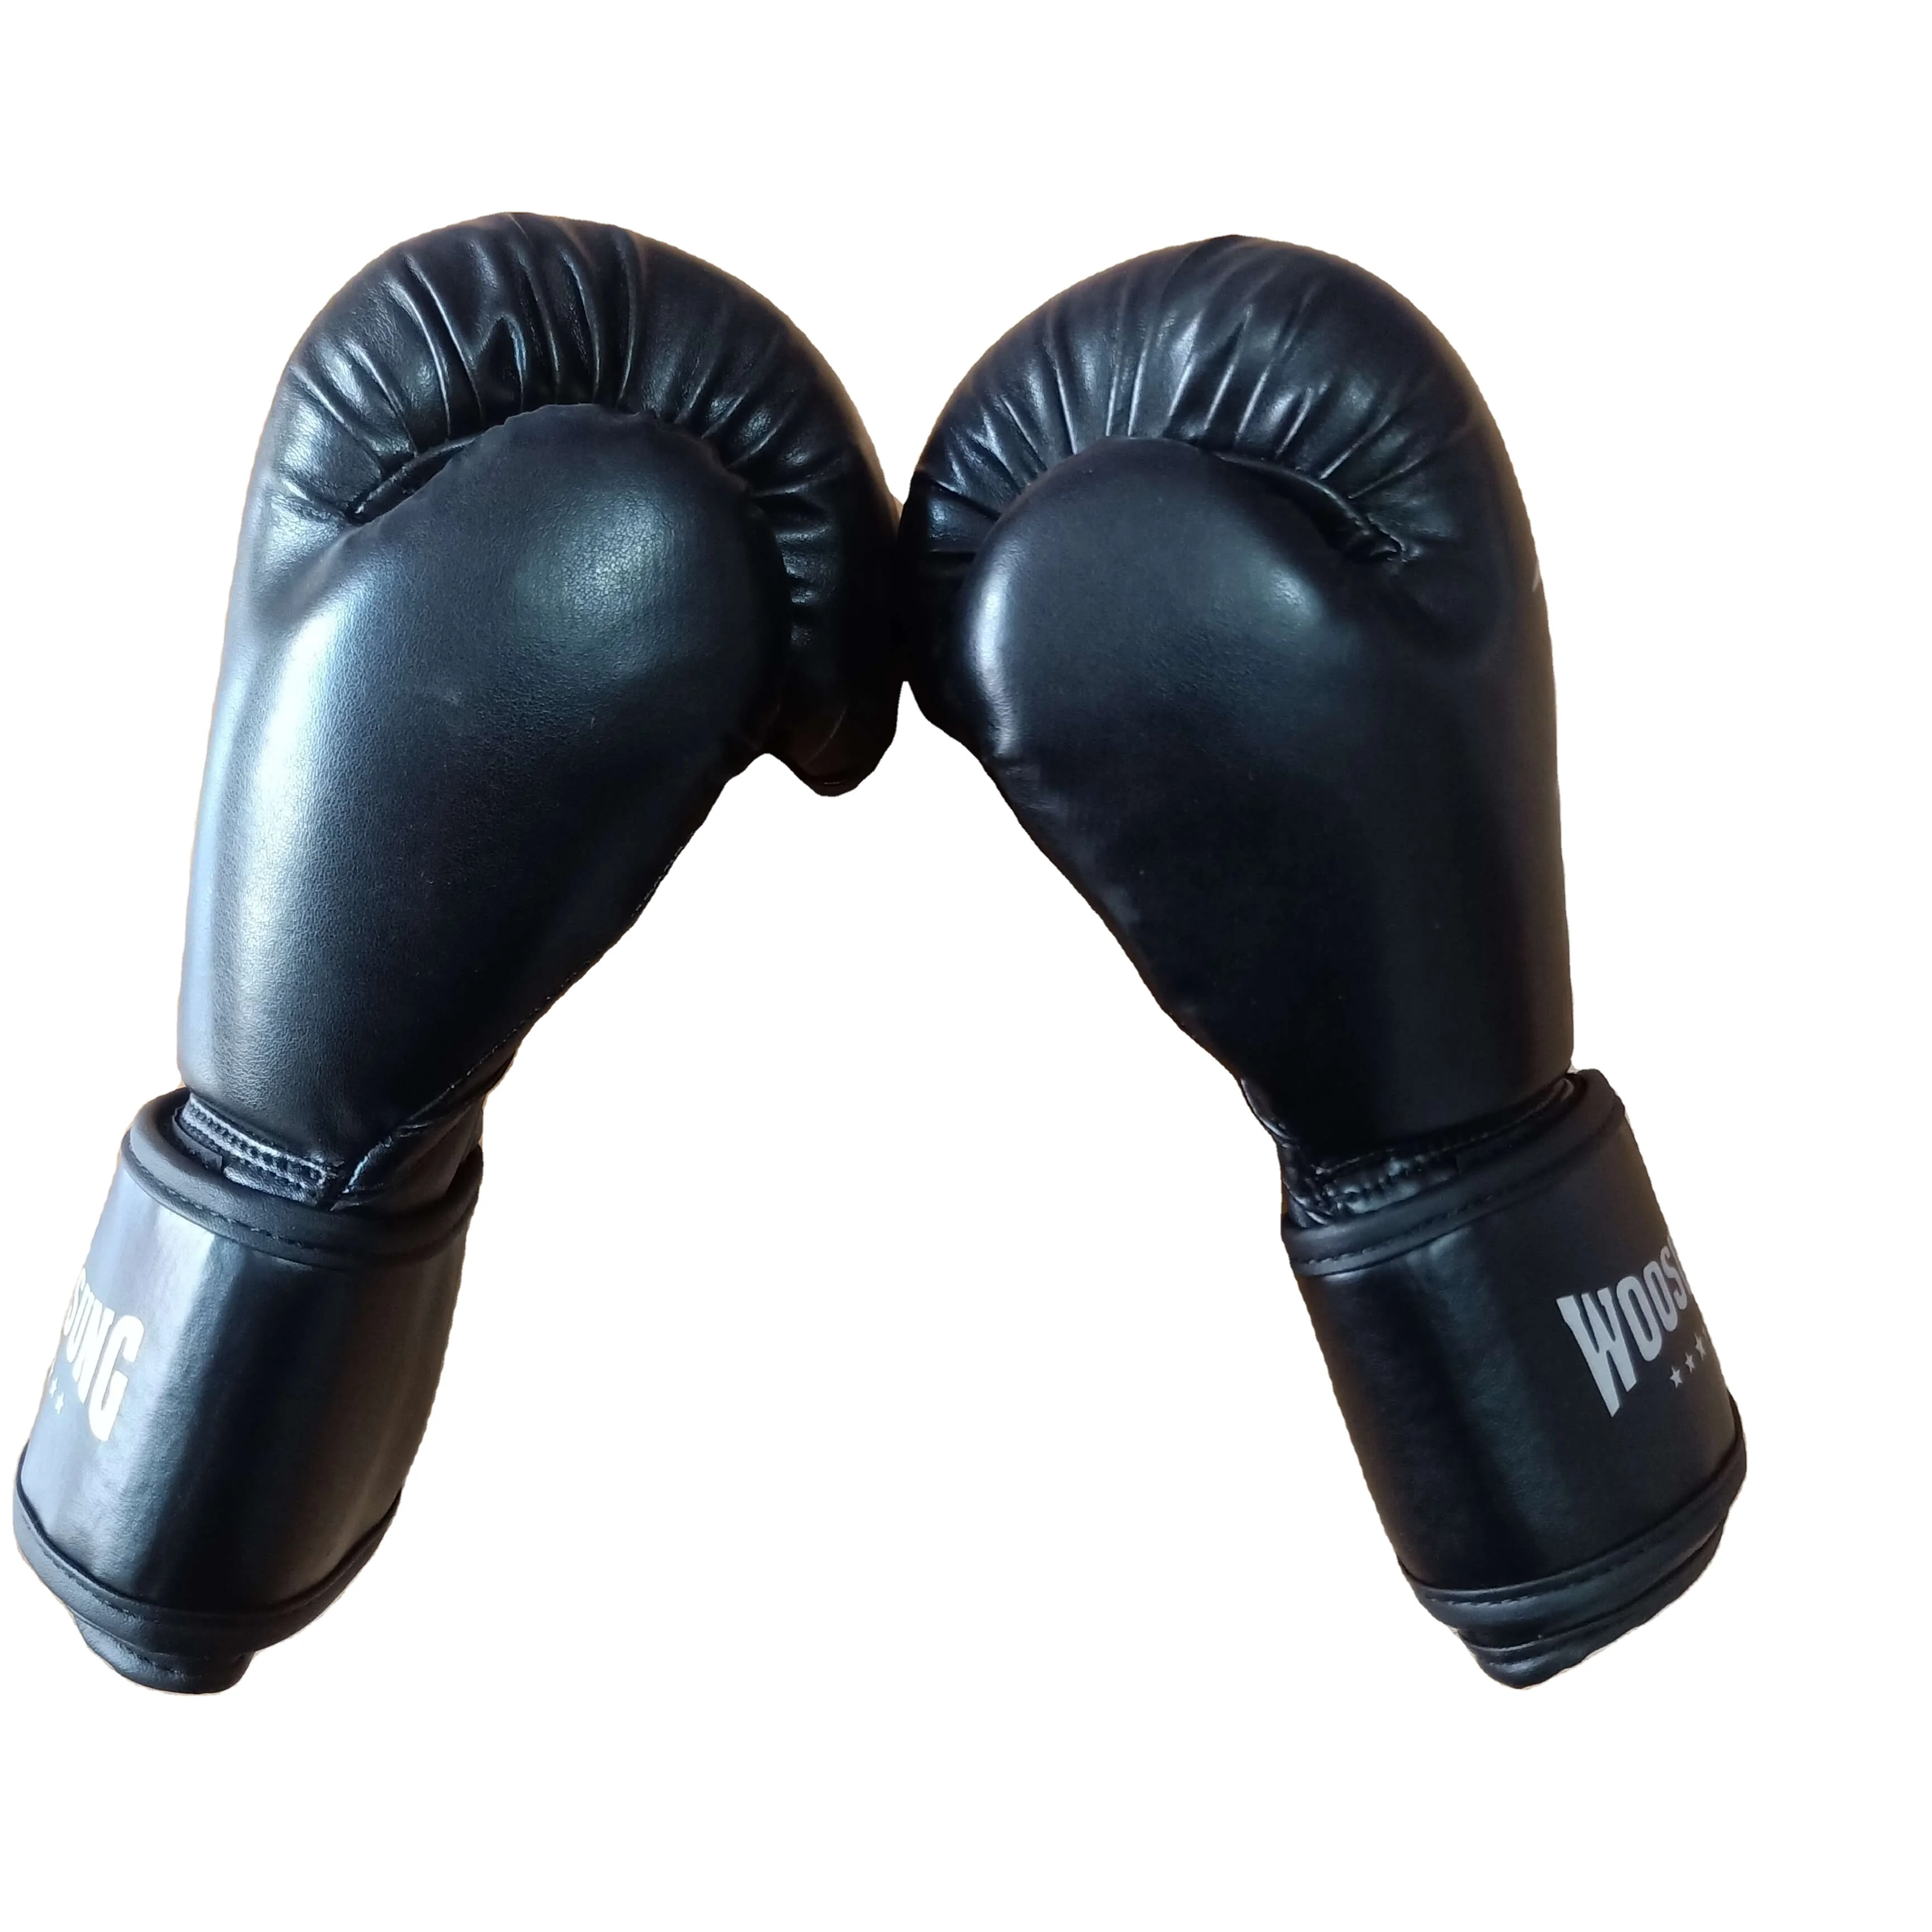 Wholesale Woosung hot selling boxing mma glove custom logo training for kids wholesale boxing gloves From m.alibaba